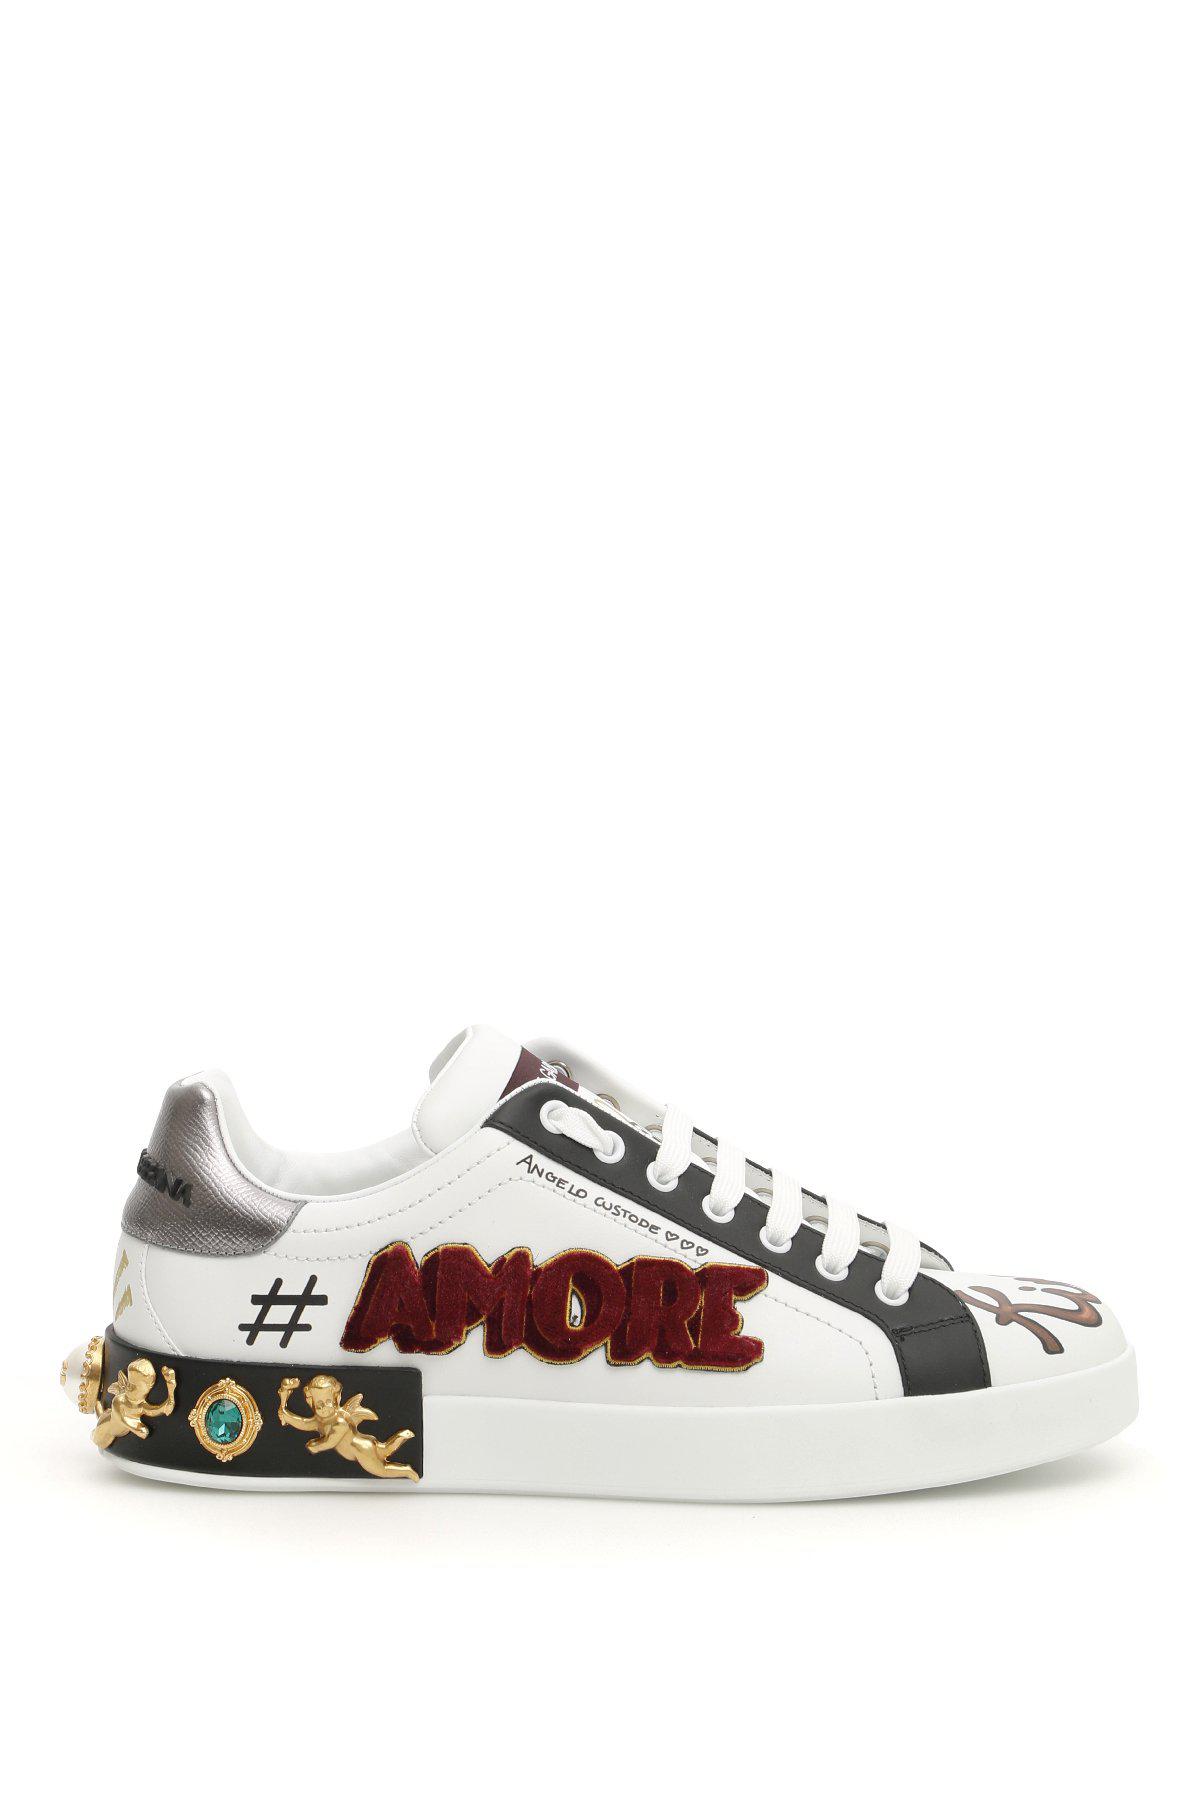 Dolce & Gabbana Amore Patch Sneakers for Men - Lyst